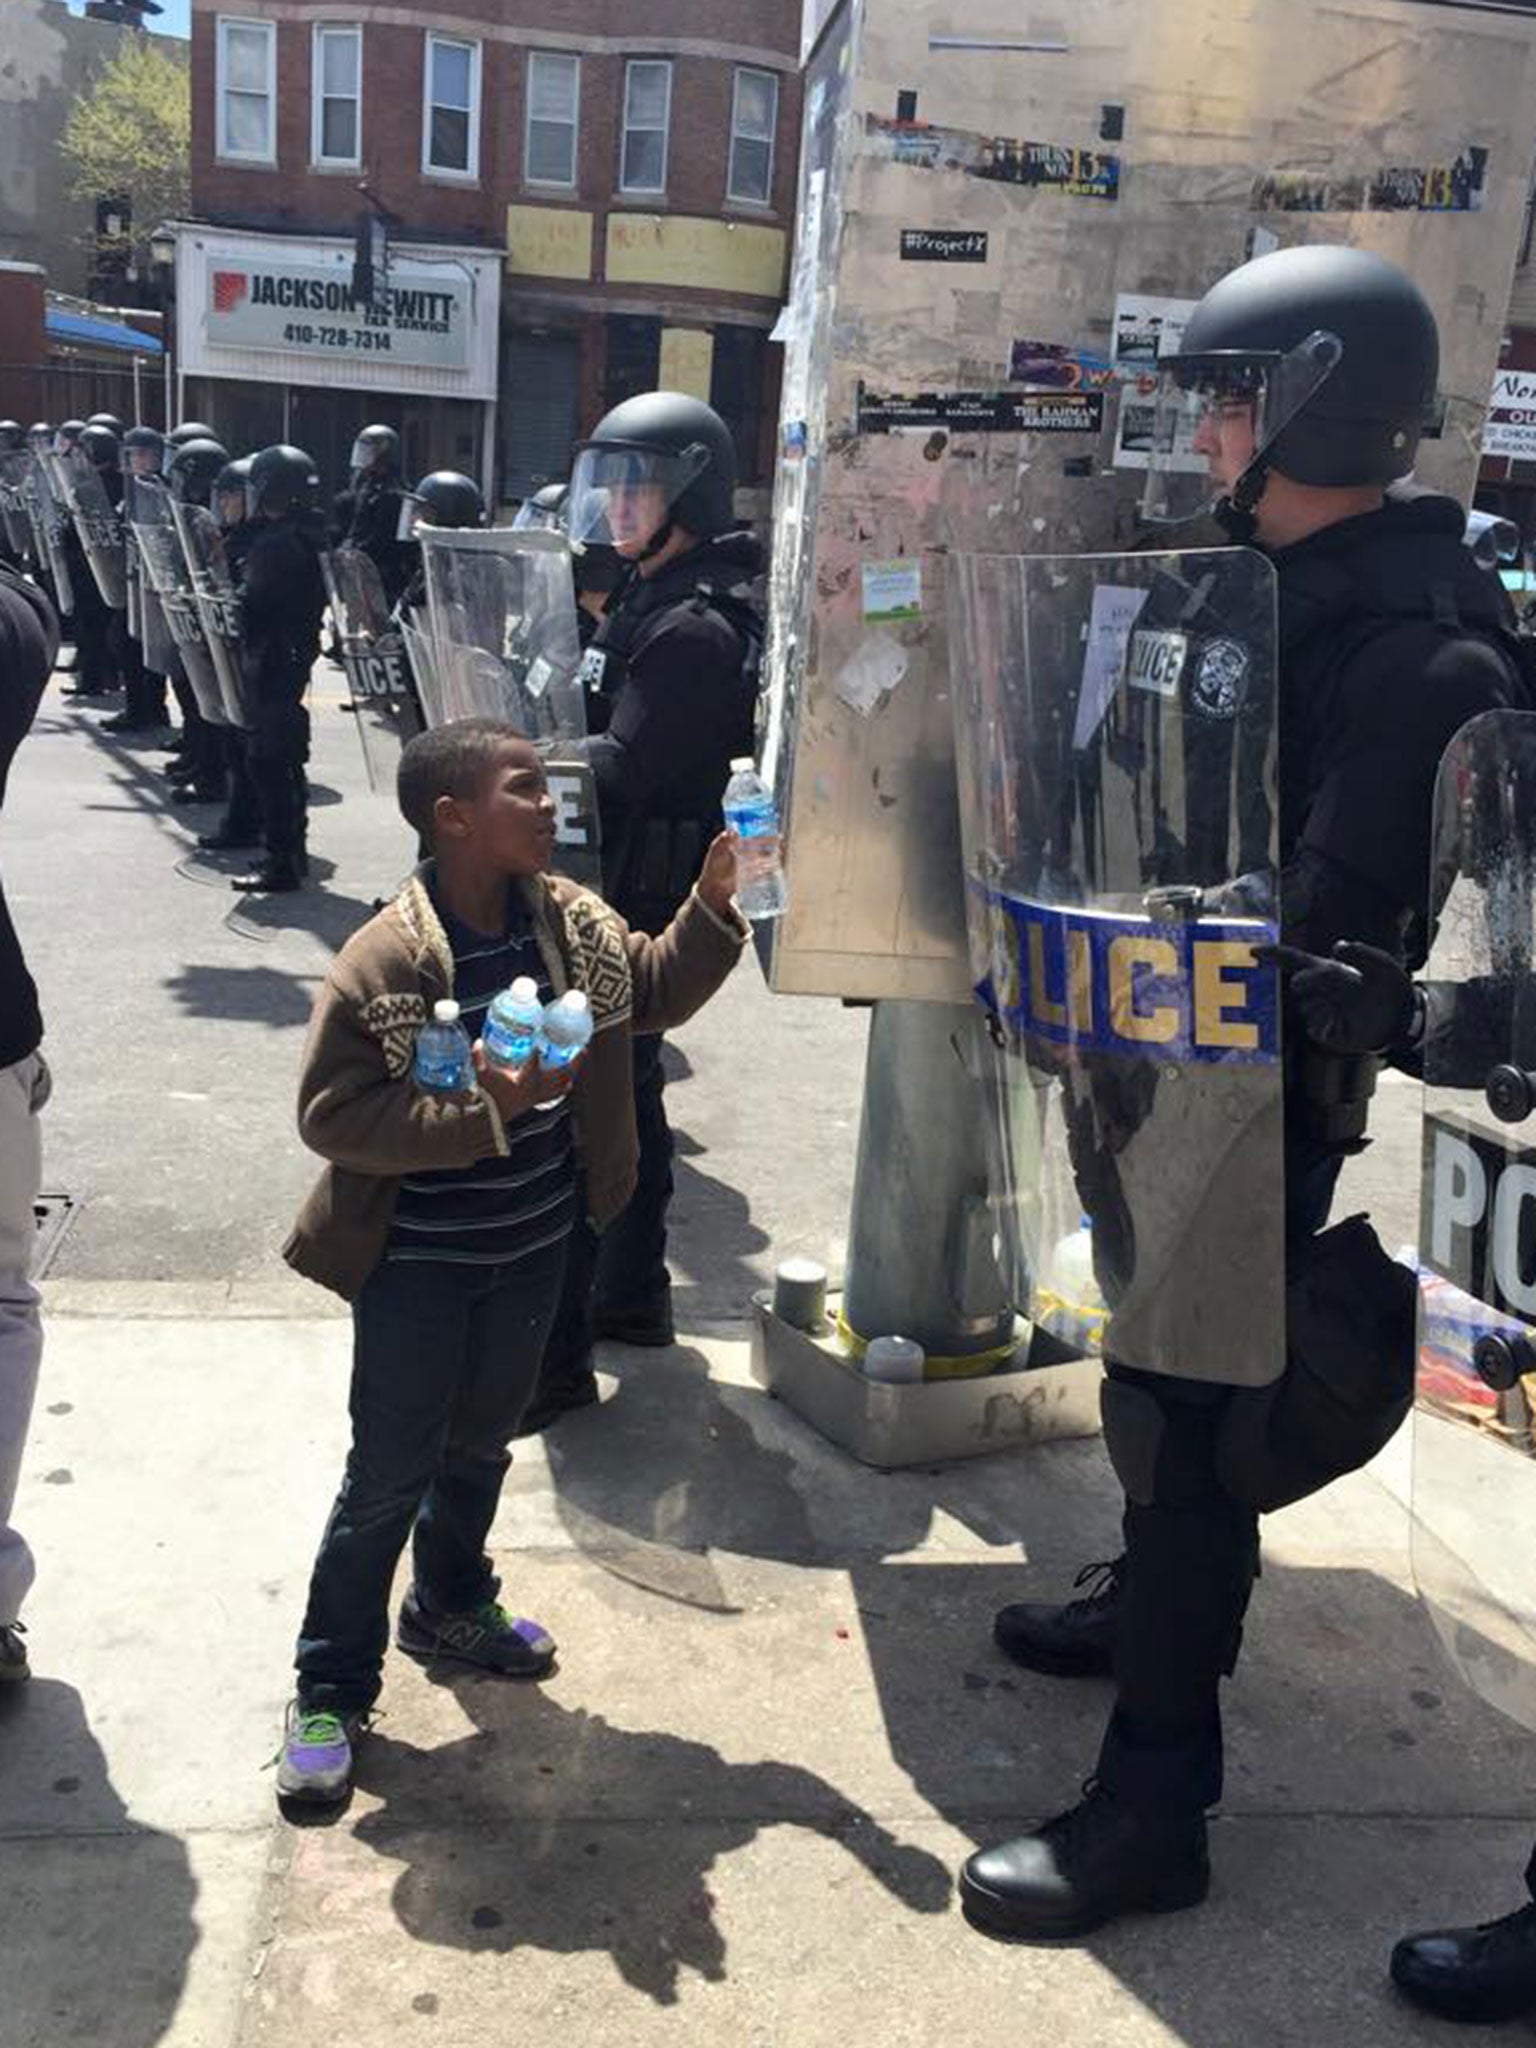 Baltimore riots The story behind the picture of a young boy handing